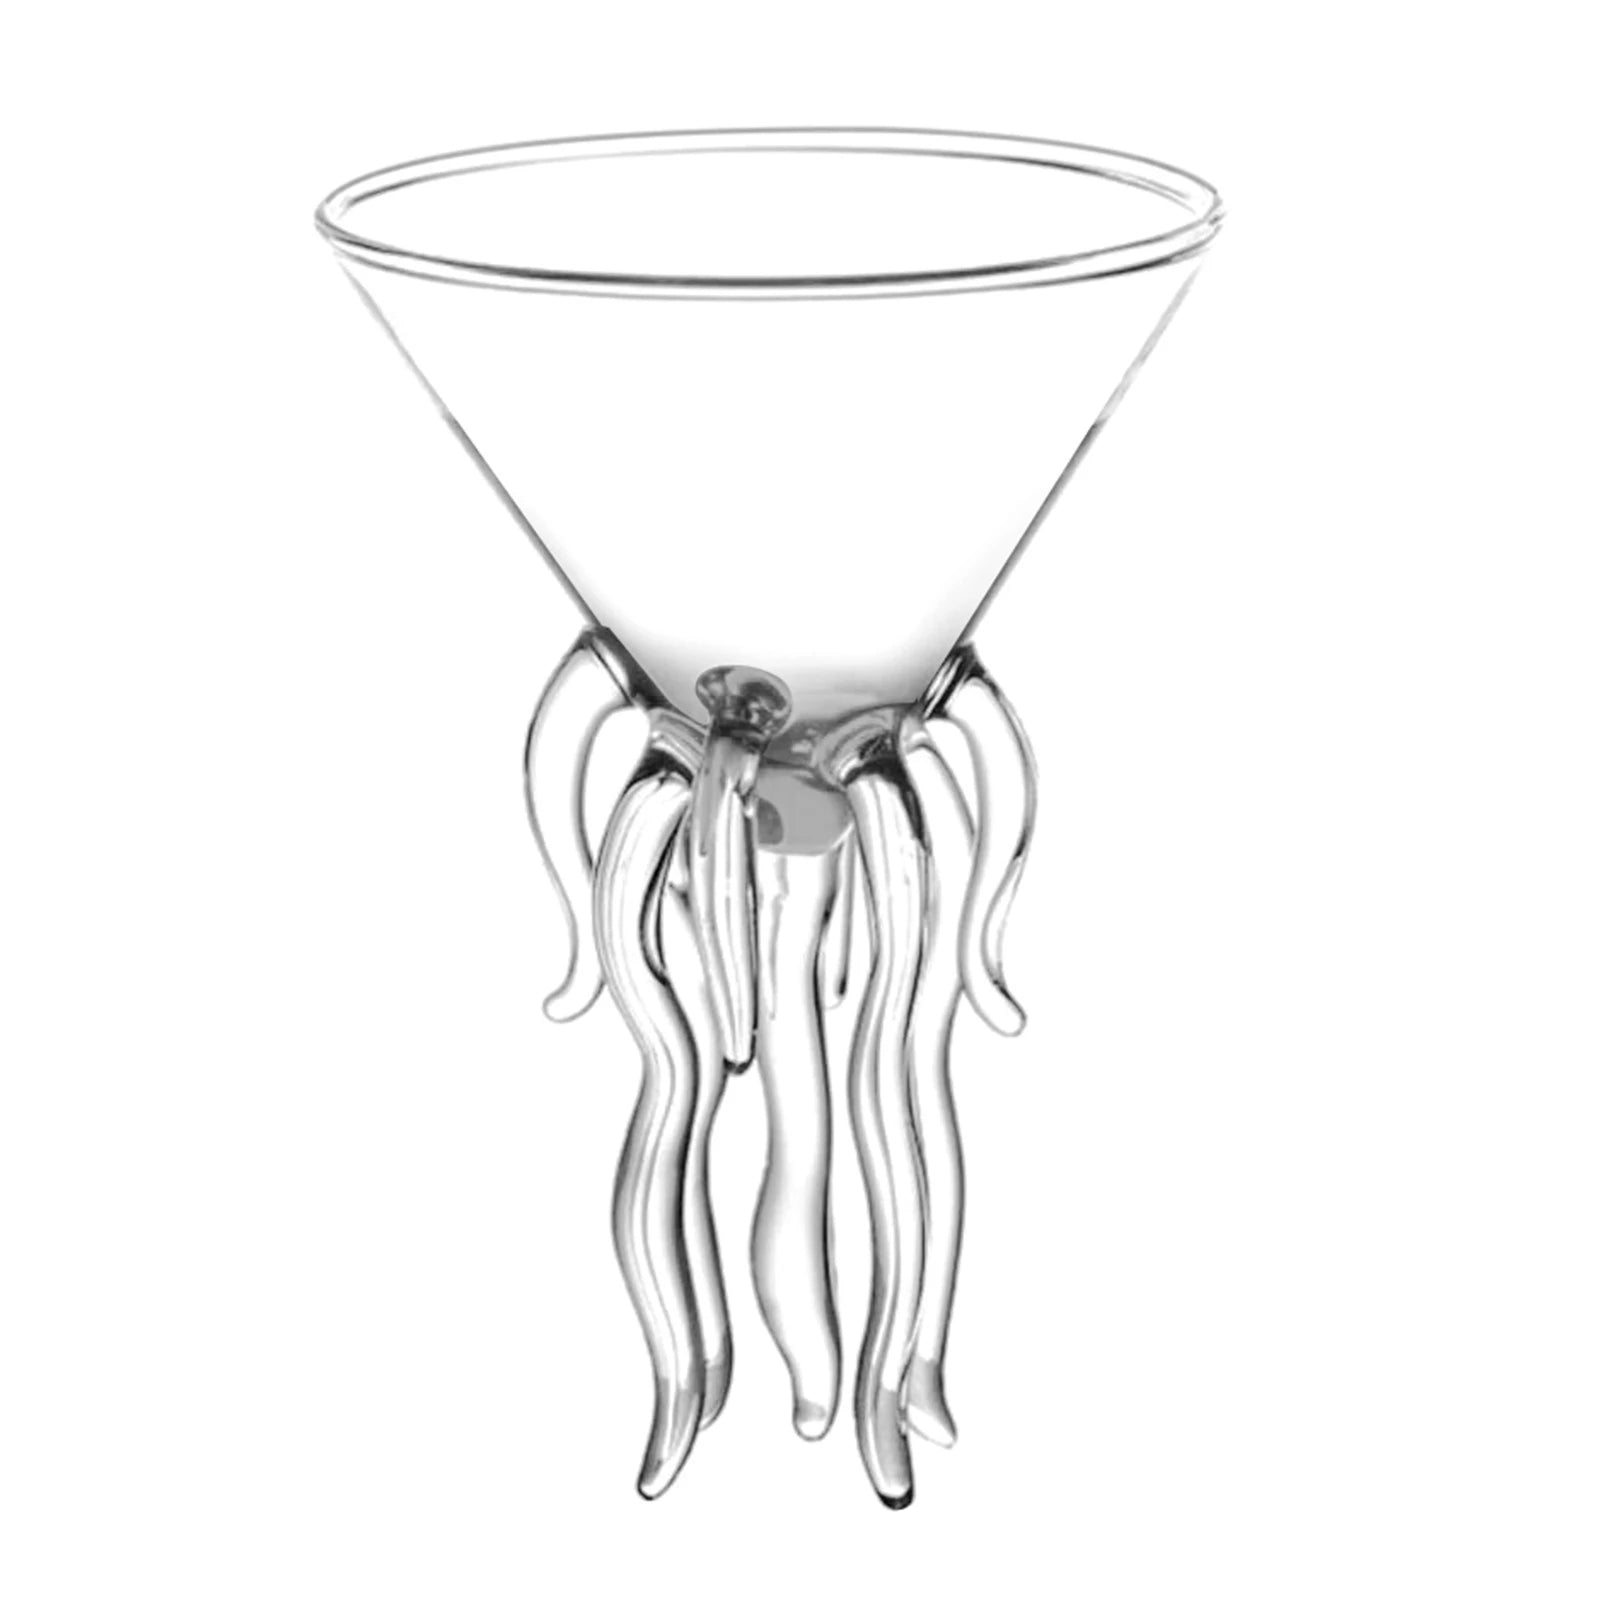 Octopus Cocktail Glass